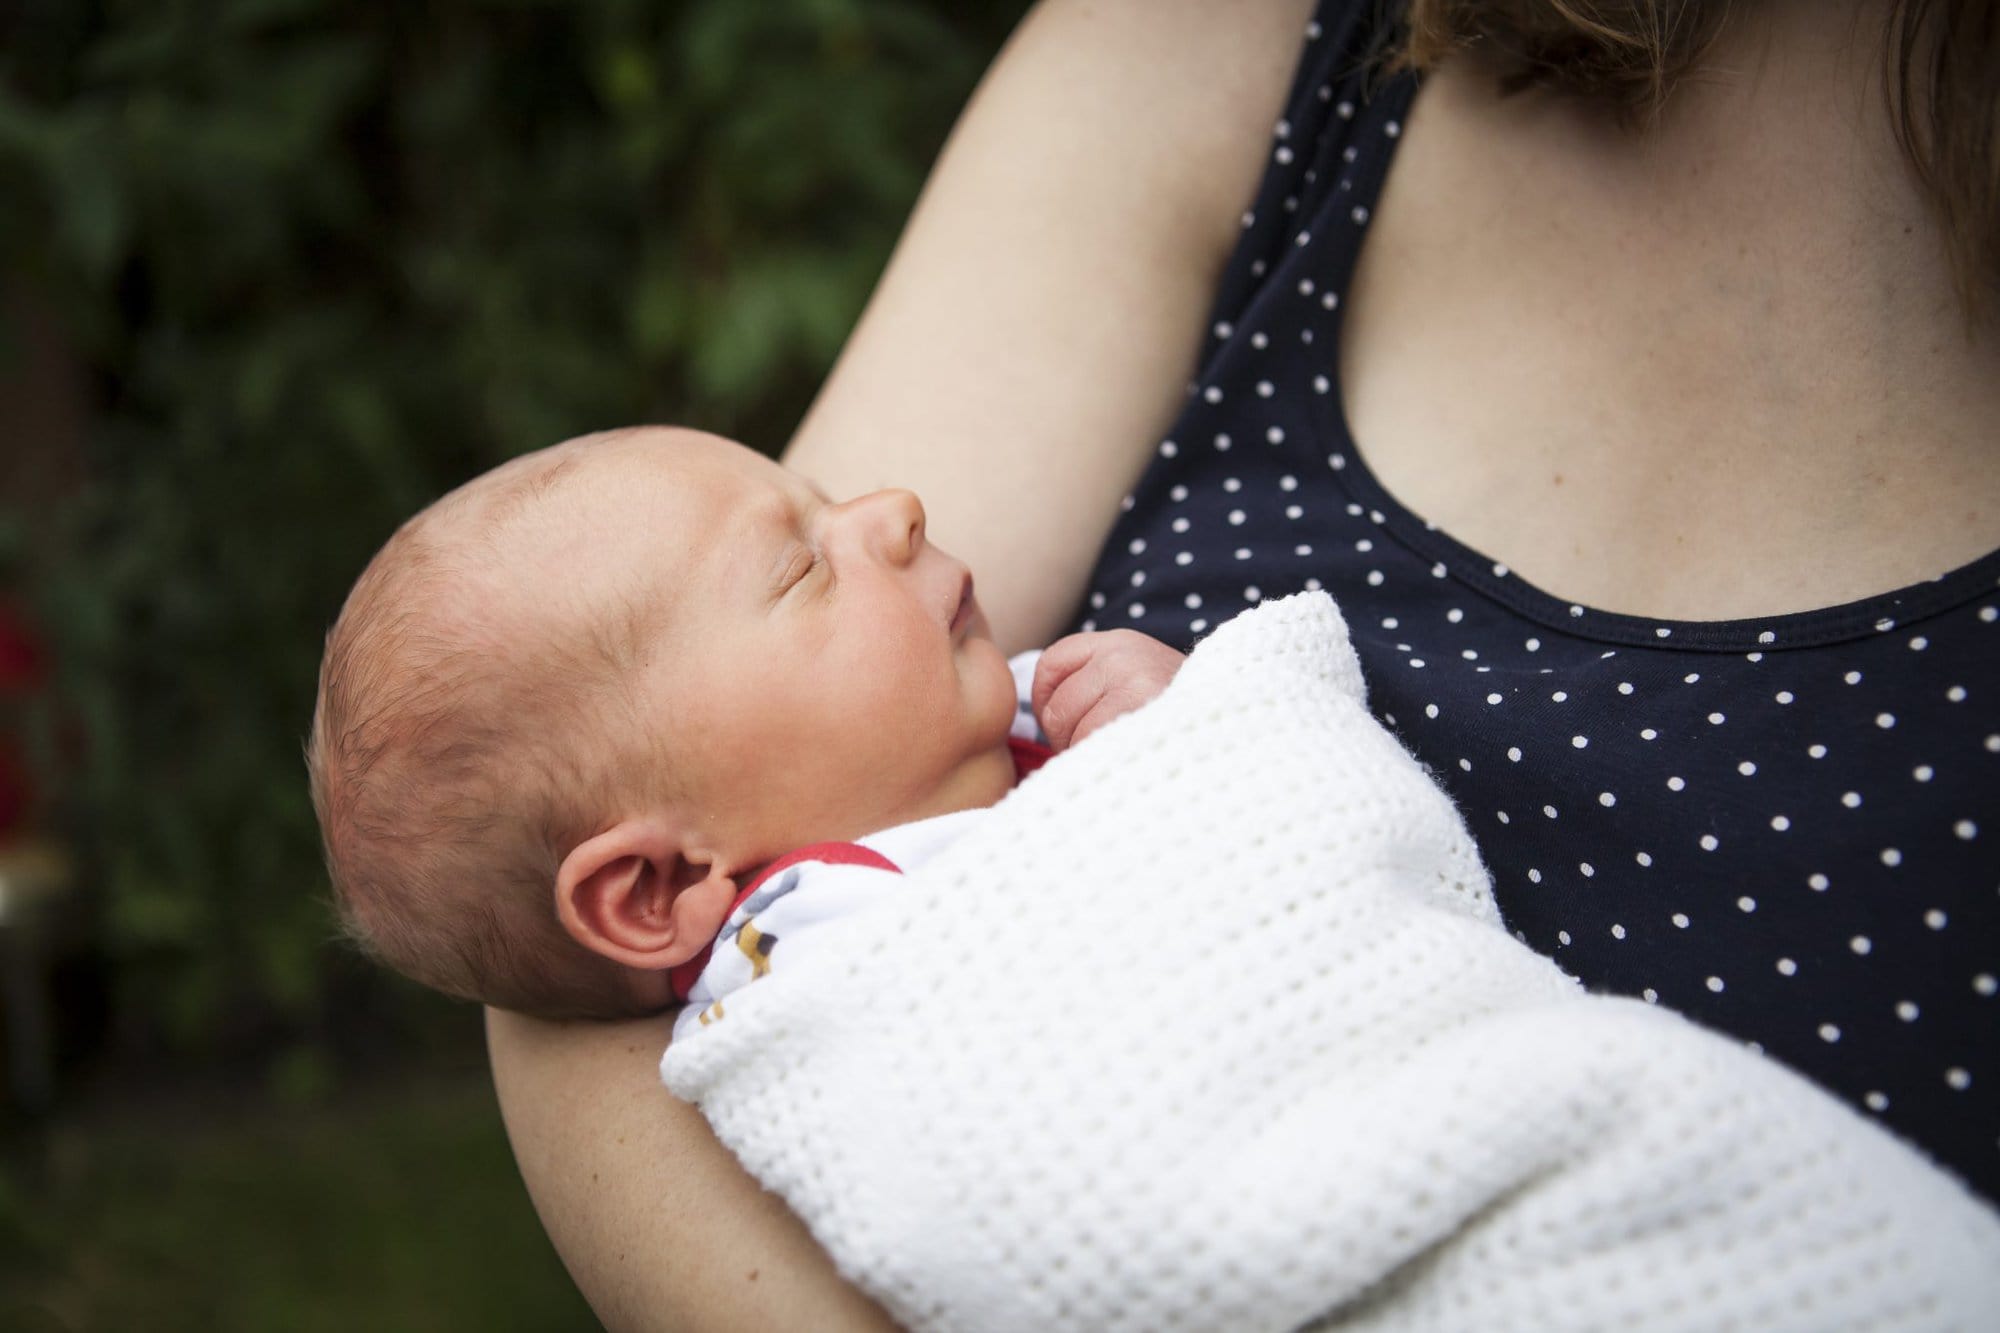 Baby cradled in mum's arms in newborn photoshoot in London